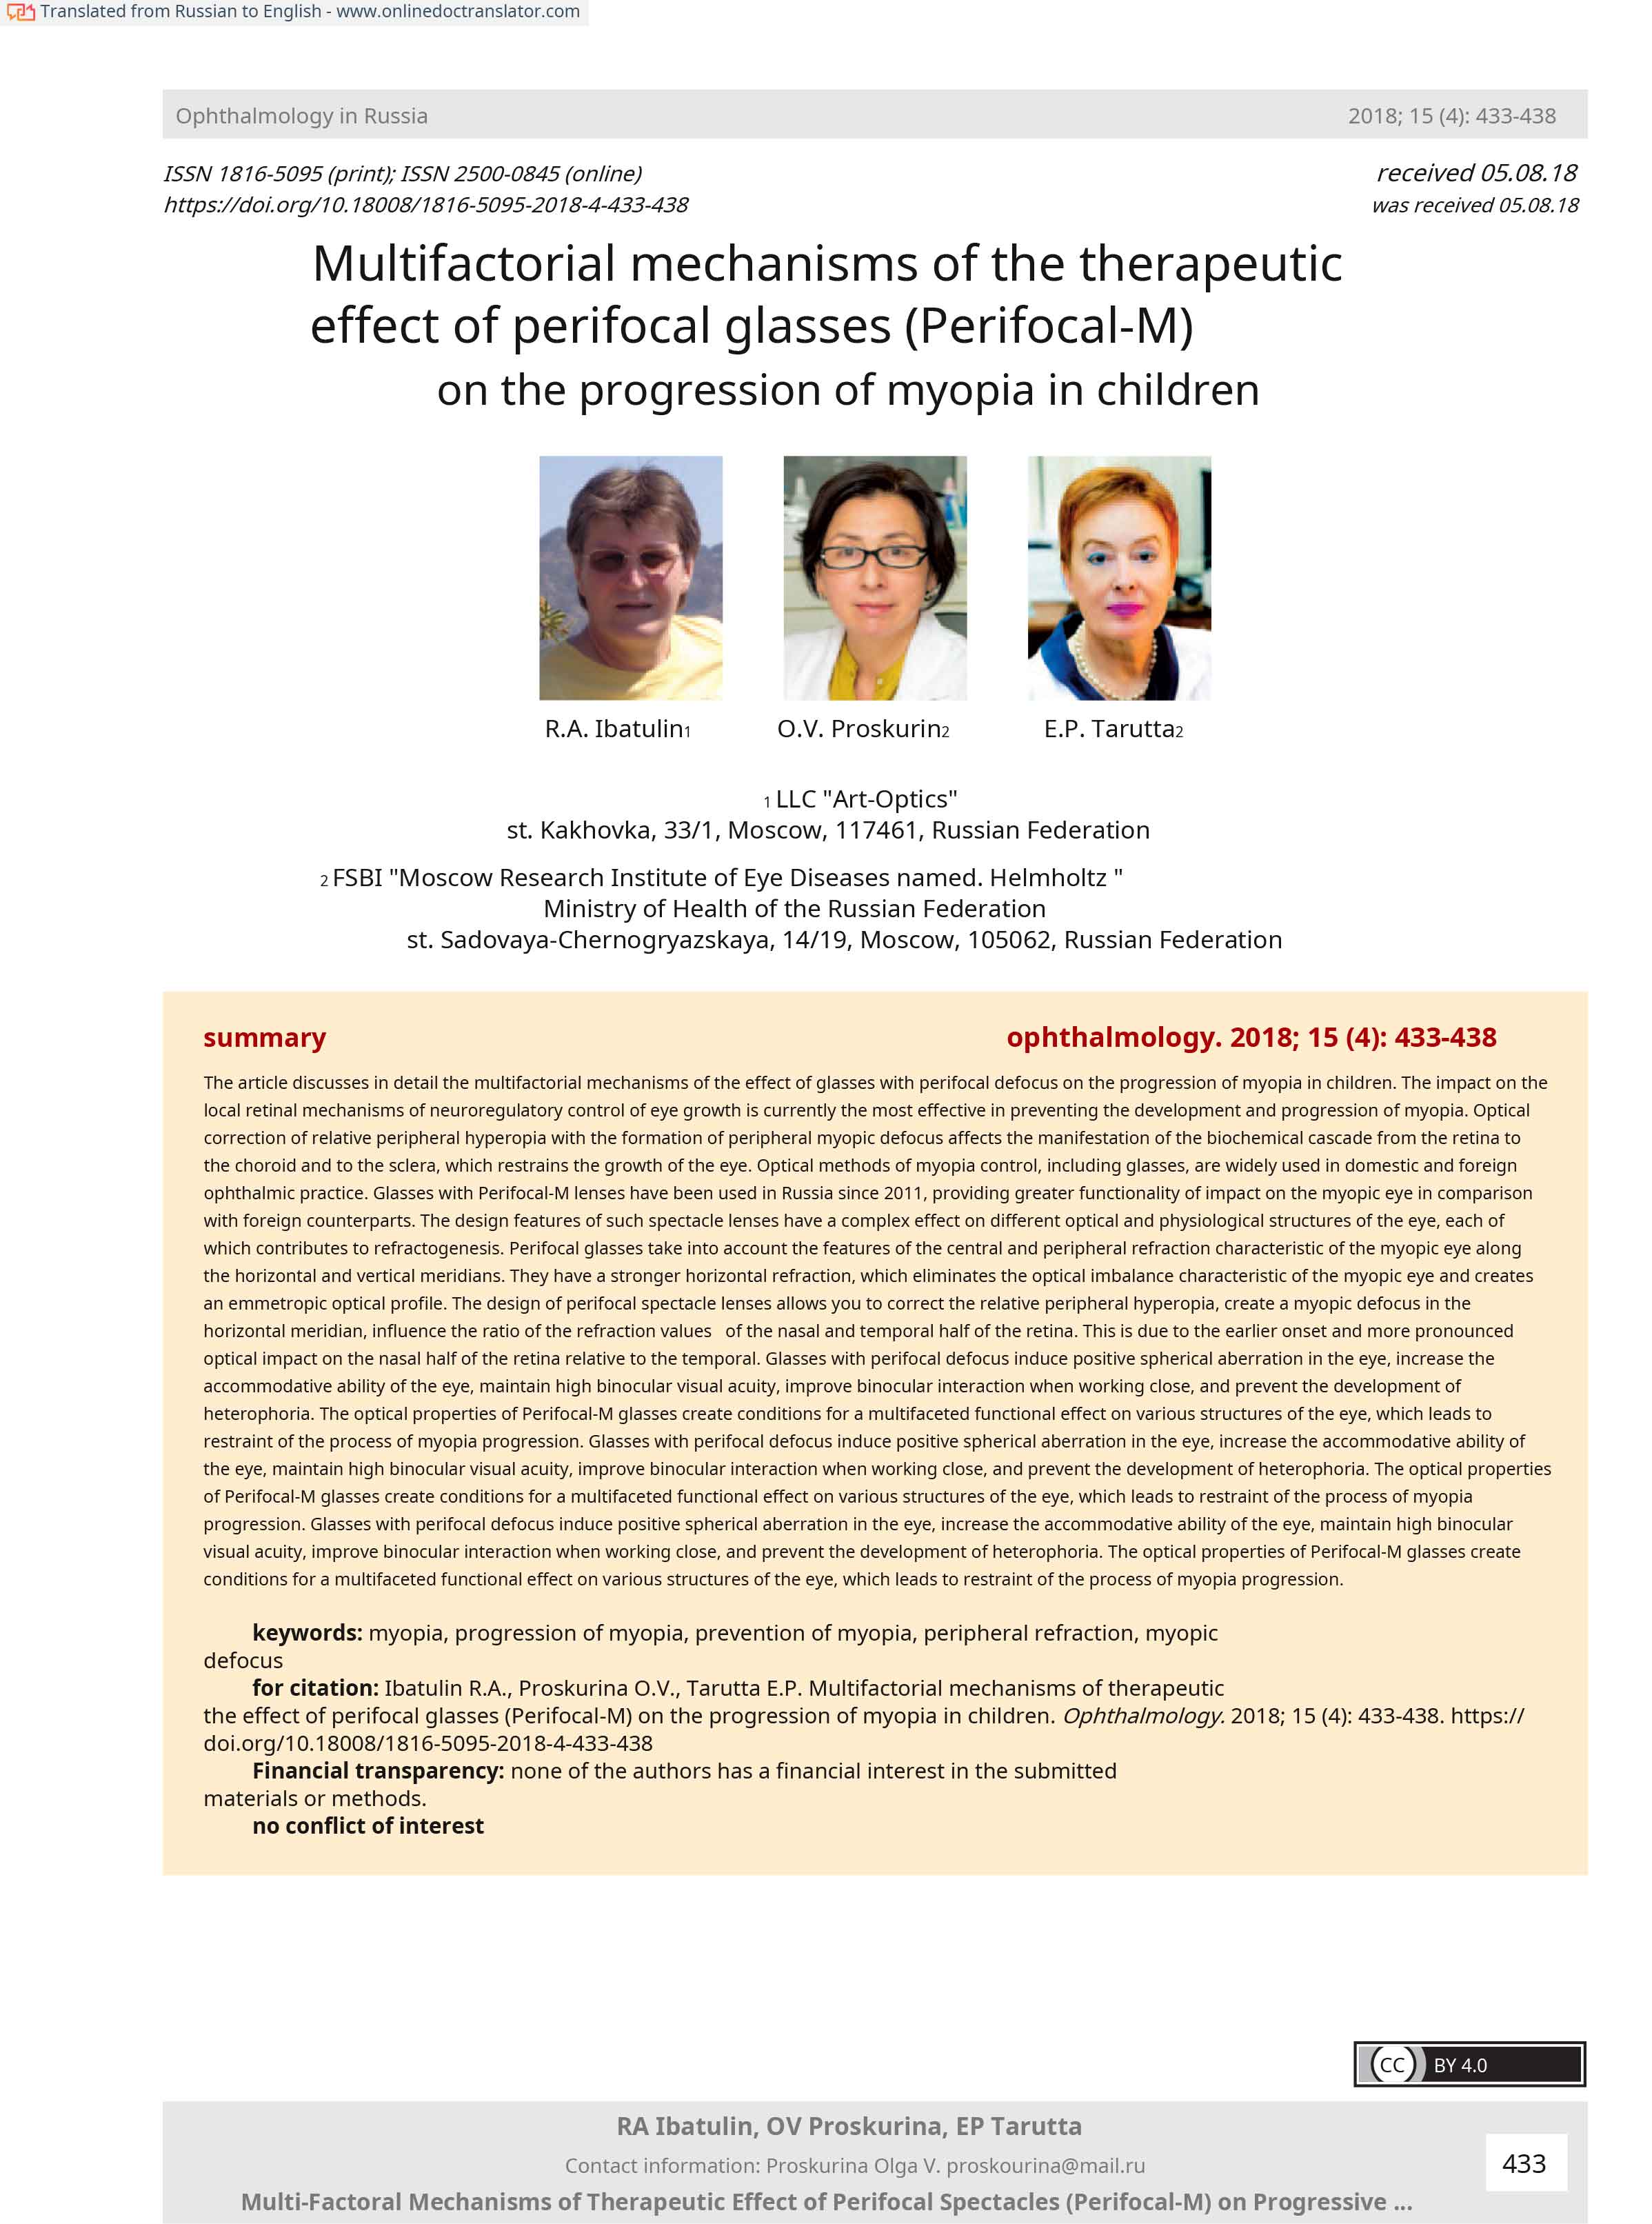 Multifactorial mechanisms of the therapeutic effect of perifocal glasses (Perifocal-M)